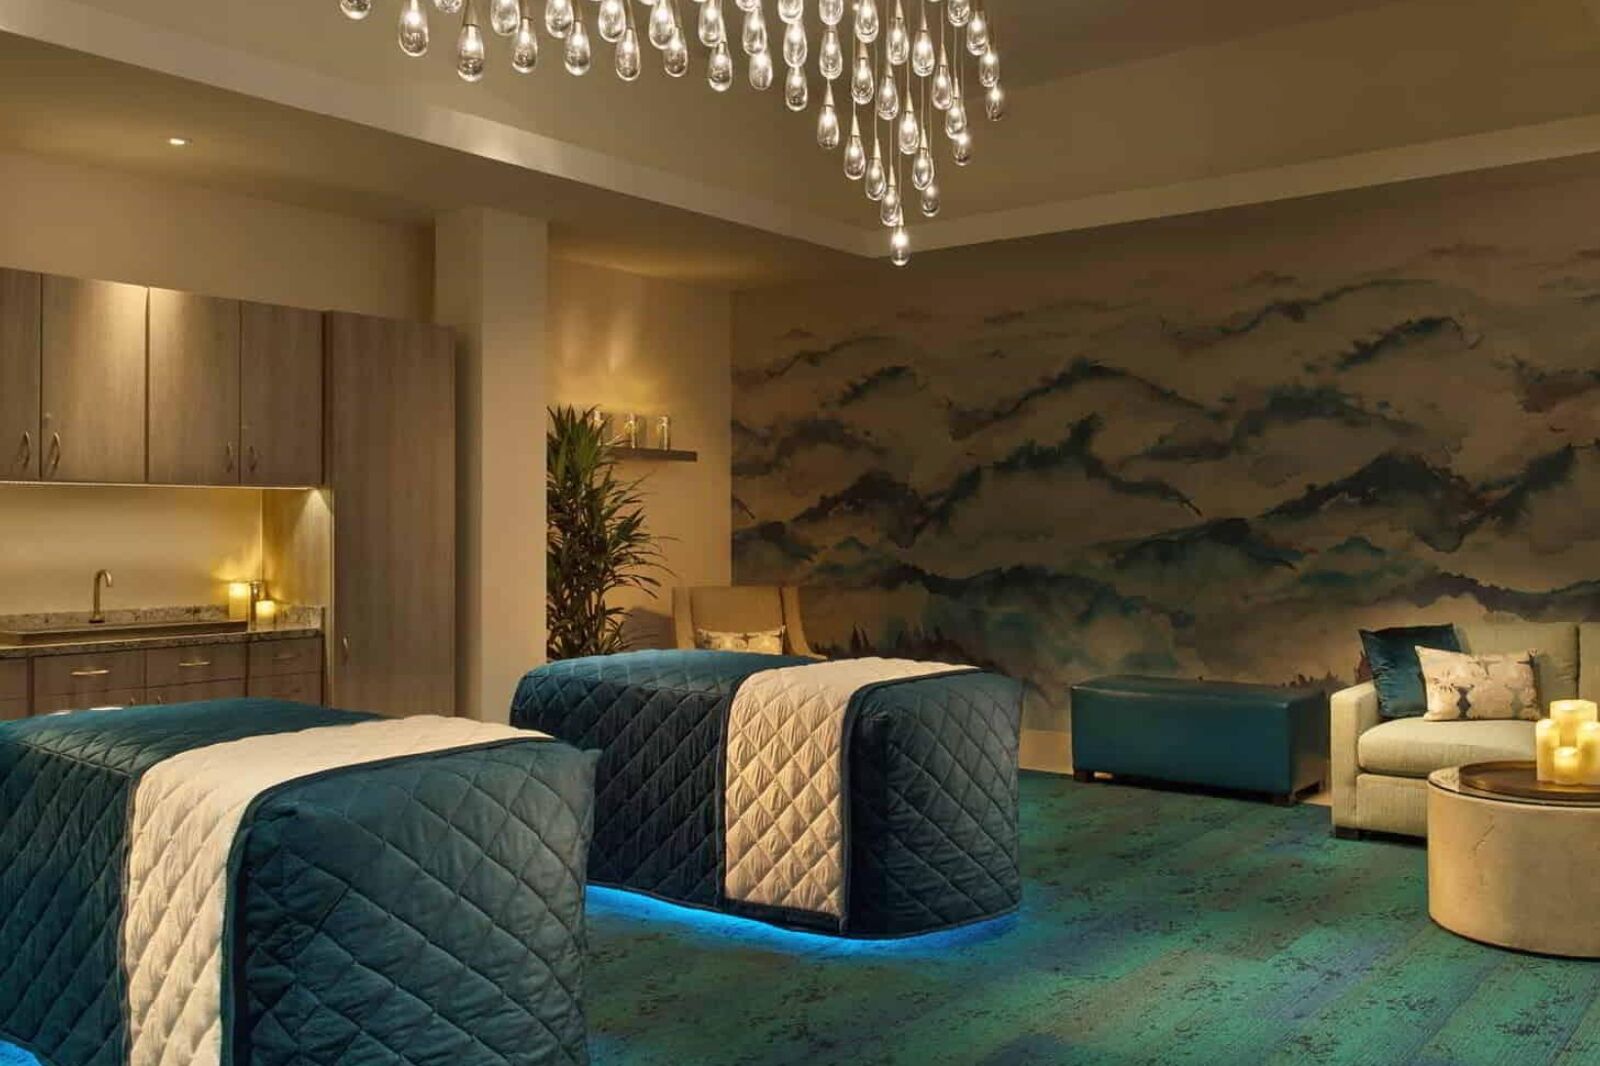 Bellagio Spa and Salon one of the best places in Las Vegas for a couples massage 